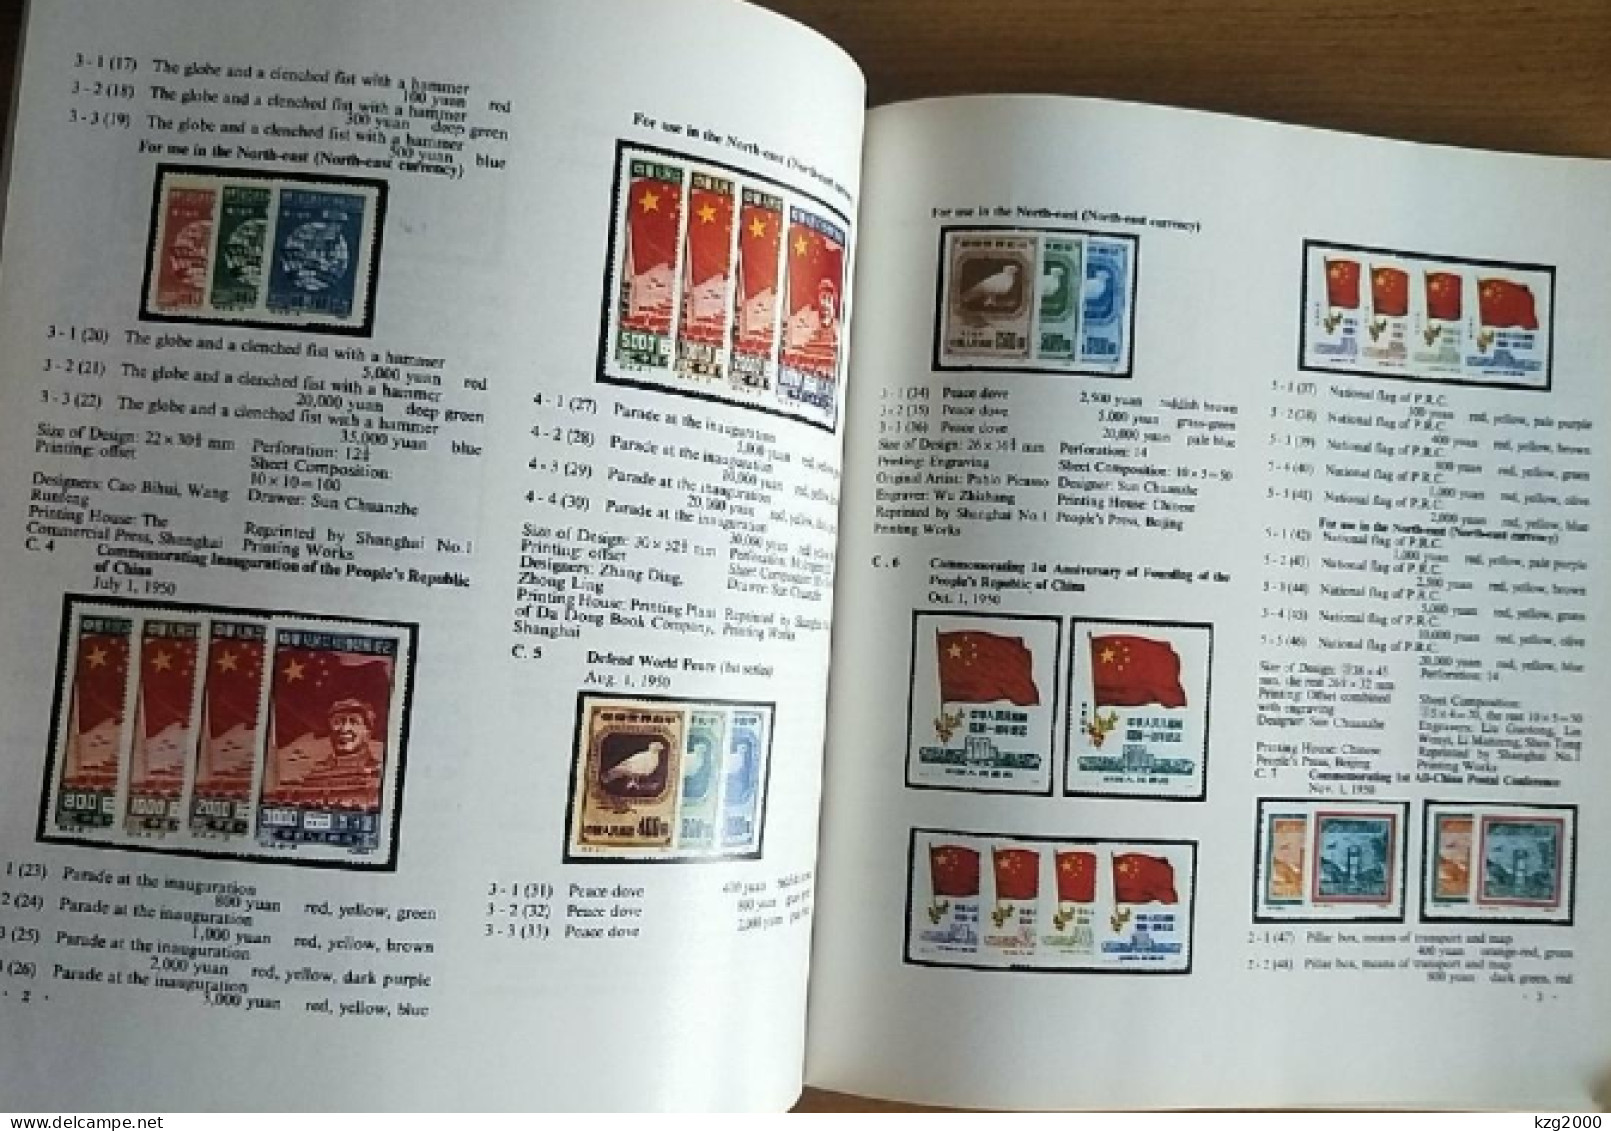 China 1949-1980 Catalogue of Stamps of the People's Republic of China (English Version)